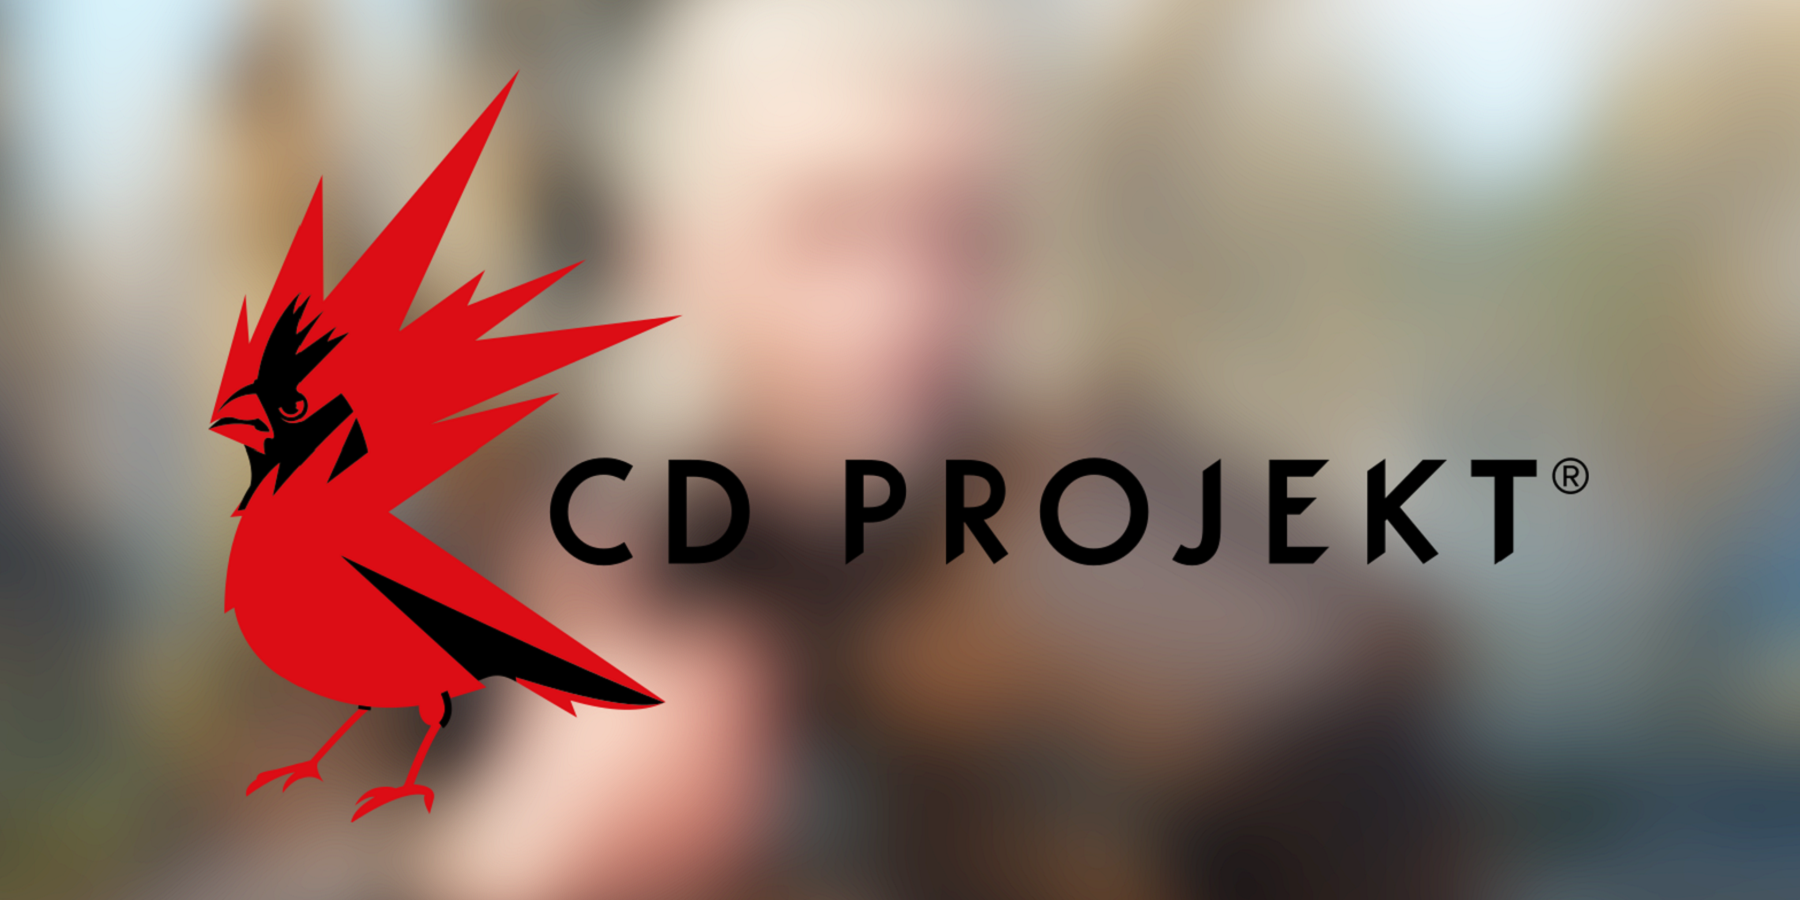 Image showing the CD Projekt Red logo with a blurry picture in the background.